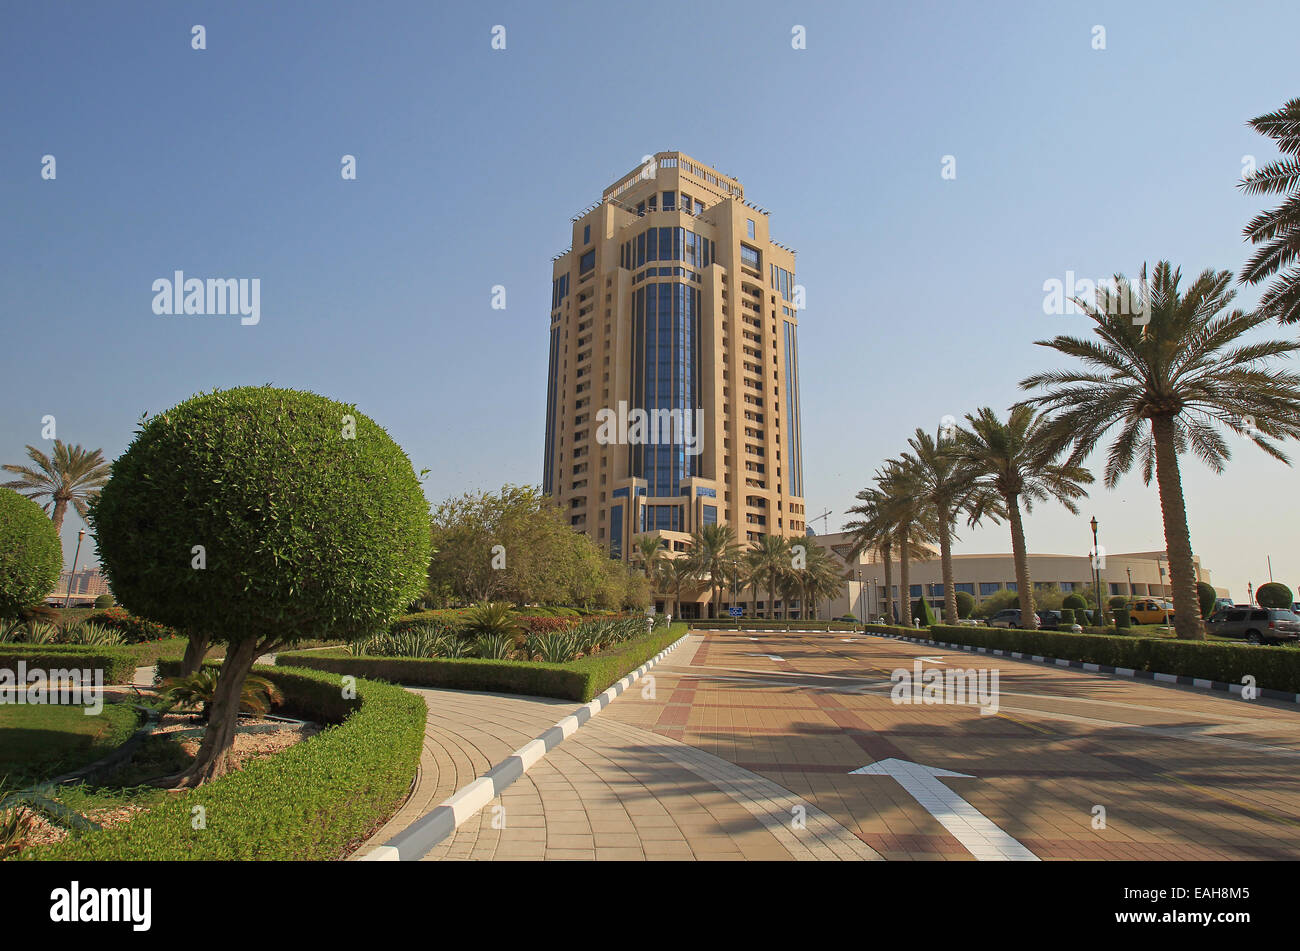 A general view leading up to the entrance of the Ritz-Carlton Hotel, Doha, Qatar Stock Photo